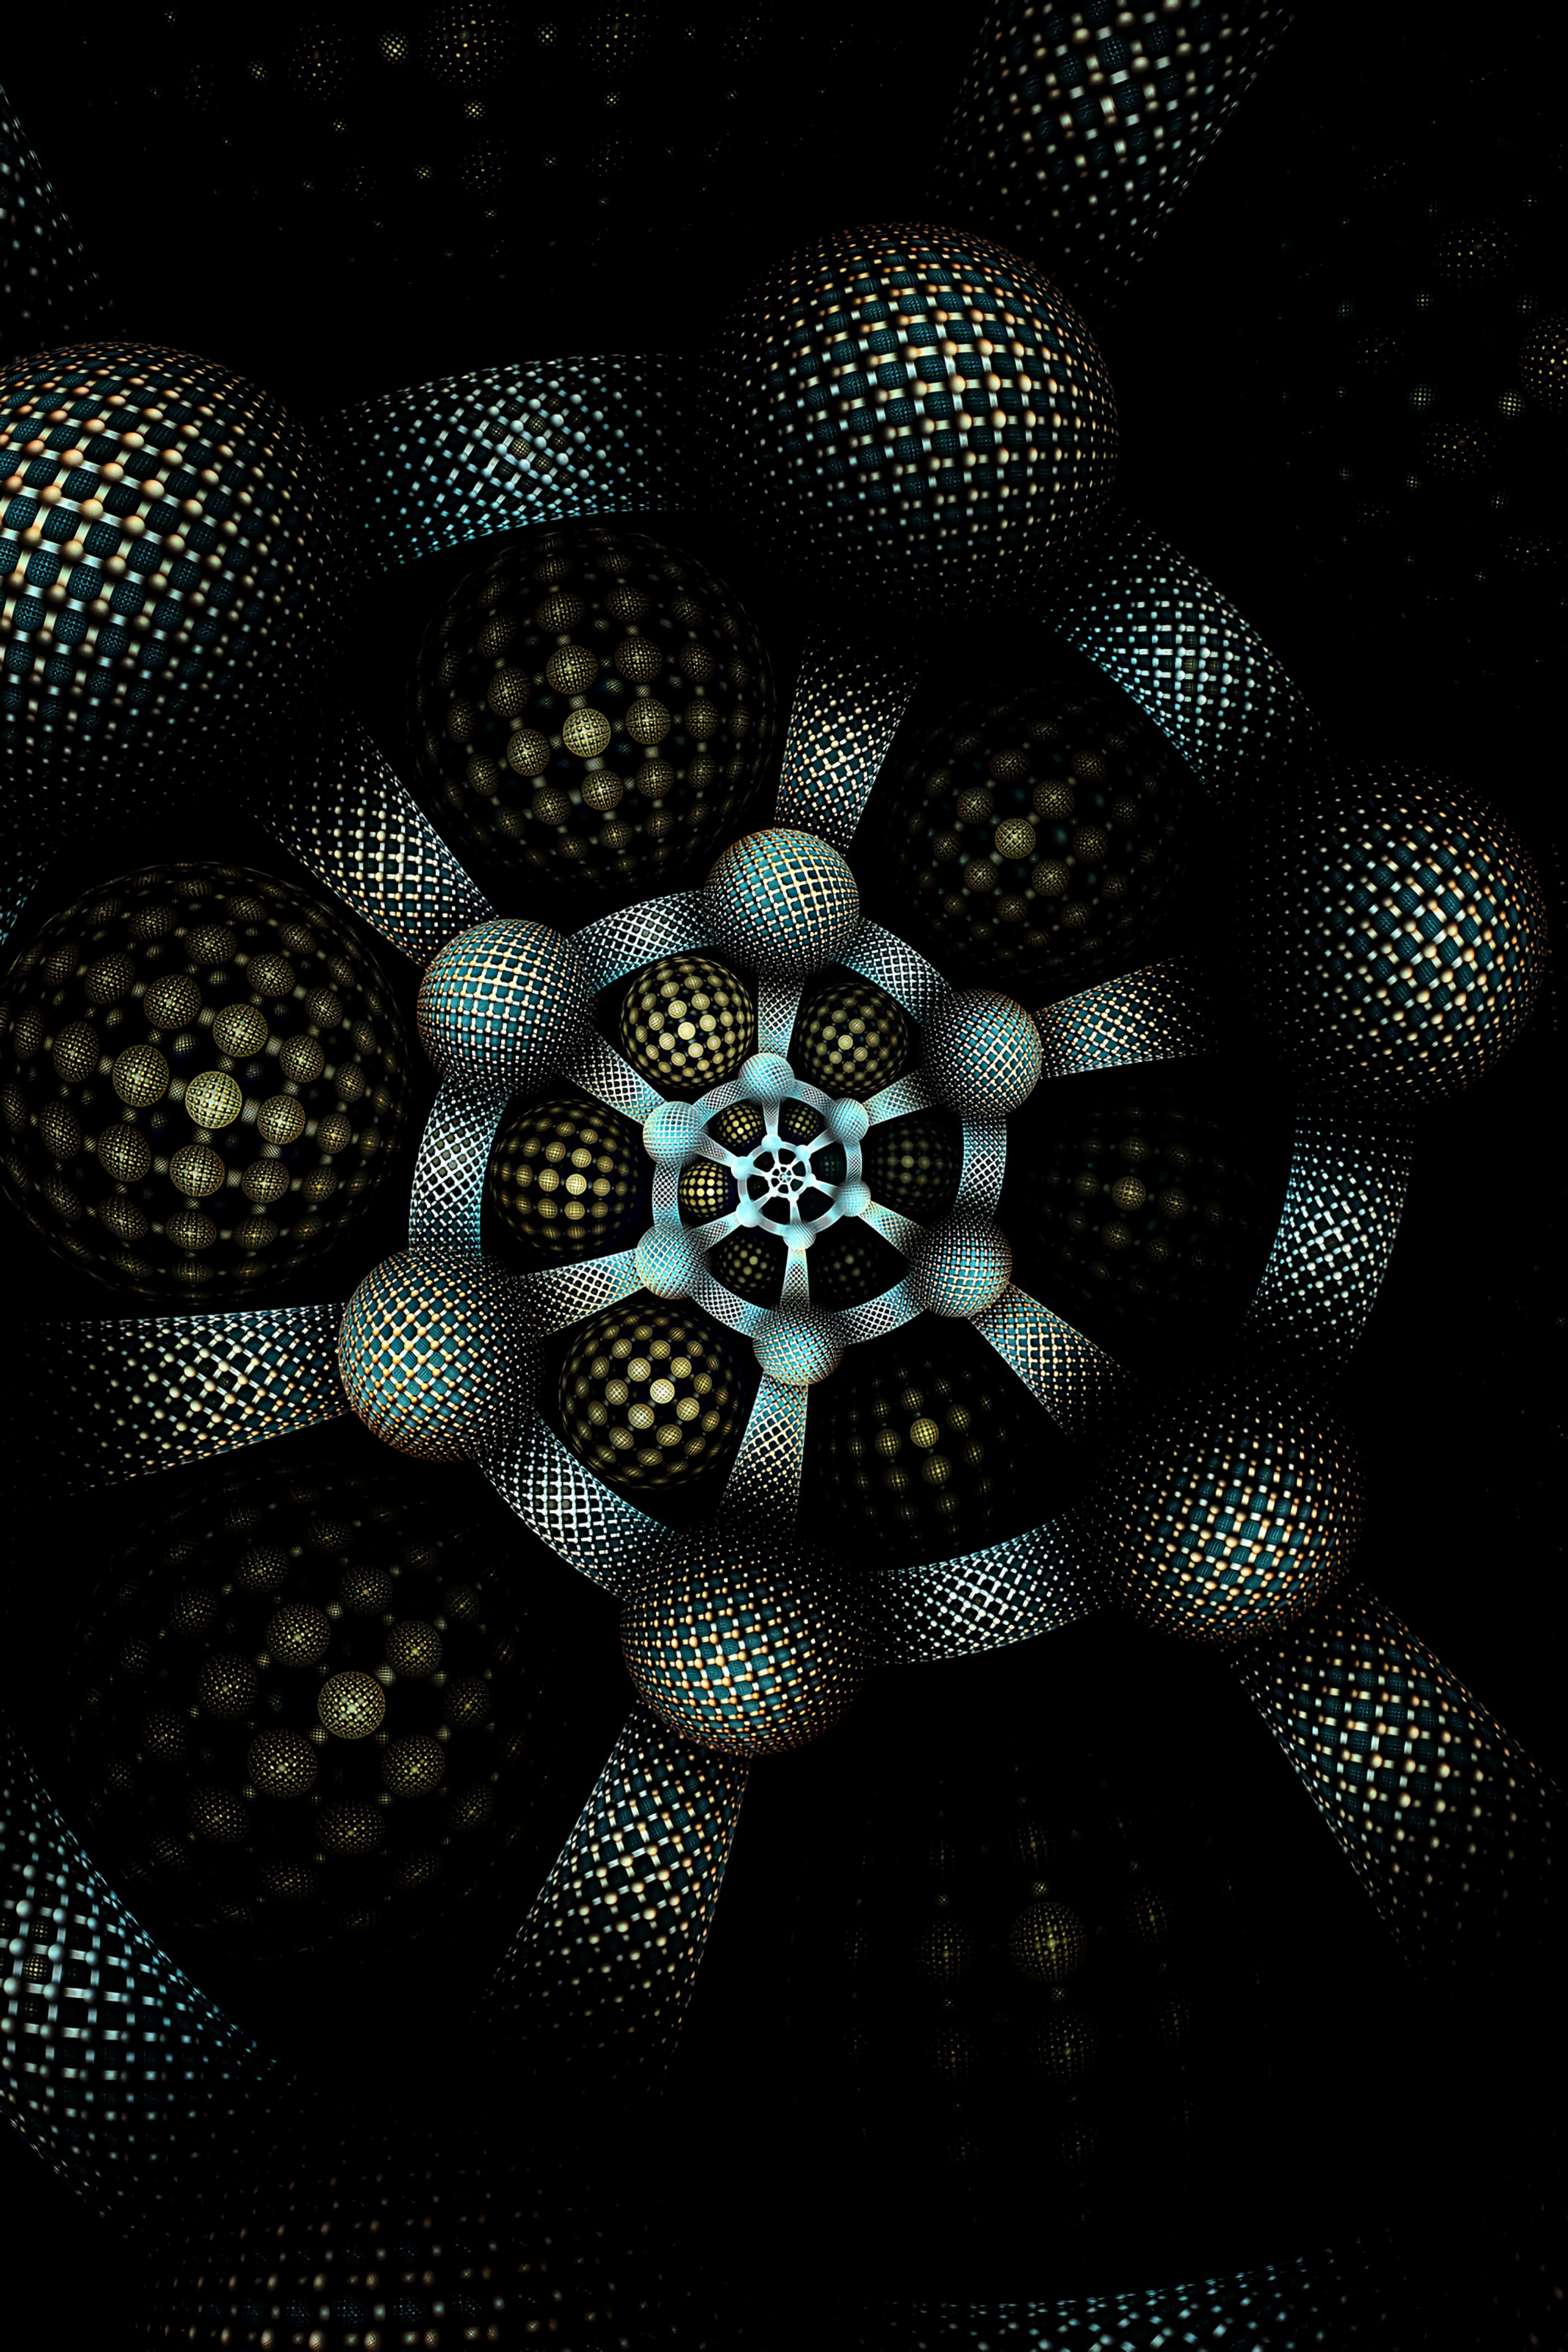 dark, form, circles, involute, abstract, pattern, fractal, swirling High Definition image